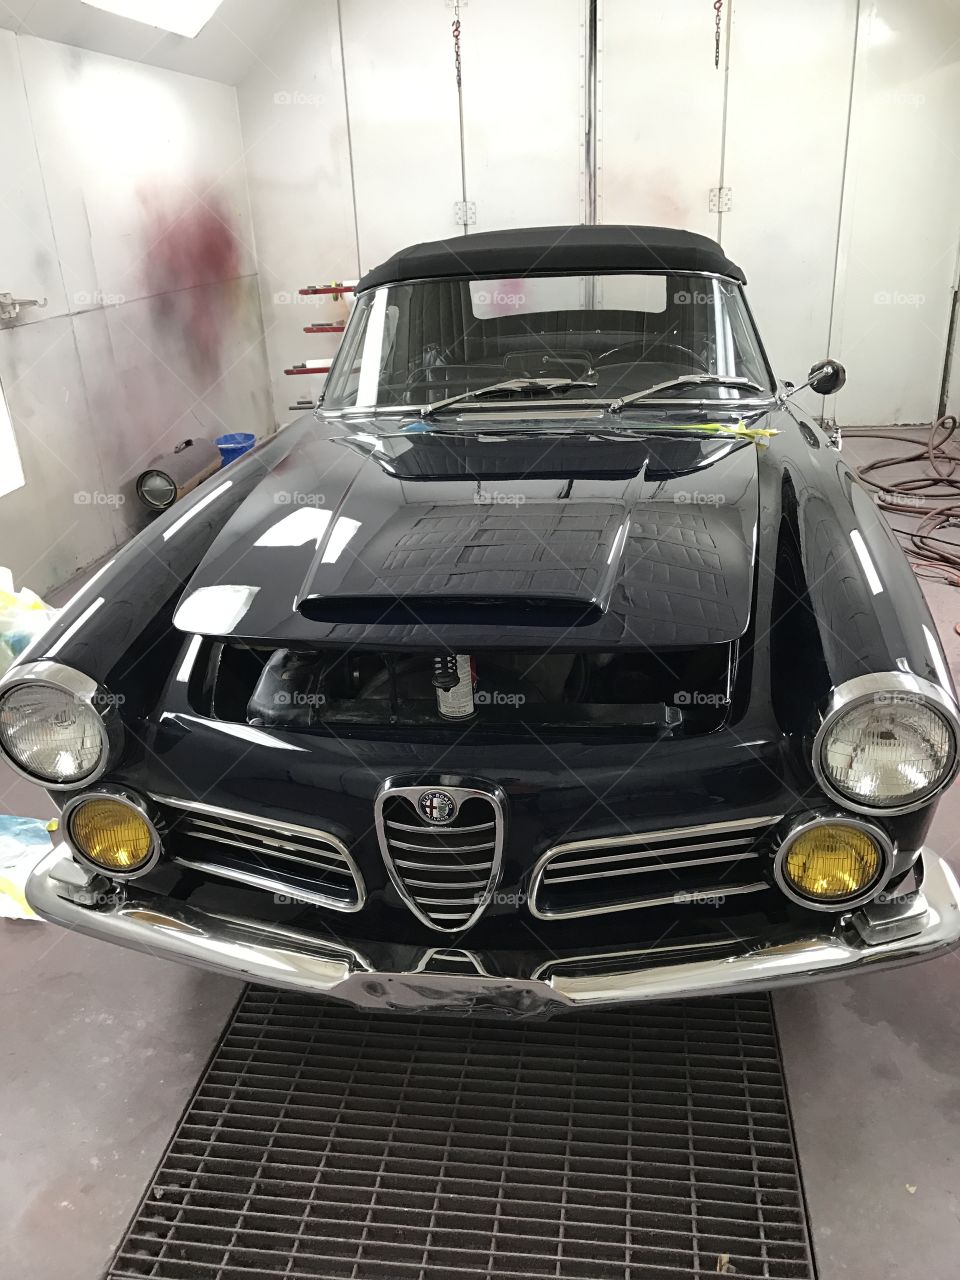 $250,000 Alfa we did work on. Must say it is nice. 15 hour wax job also. 😋